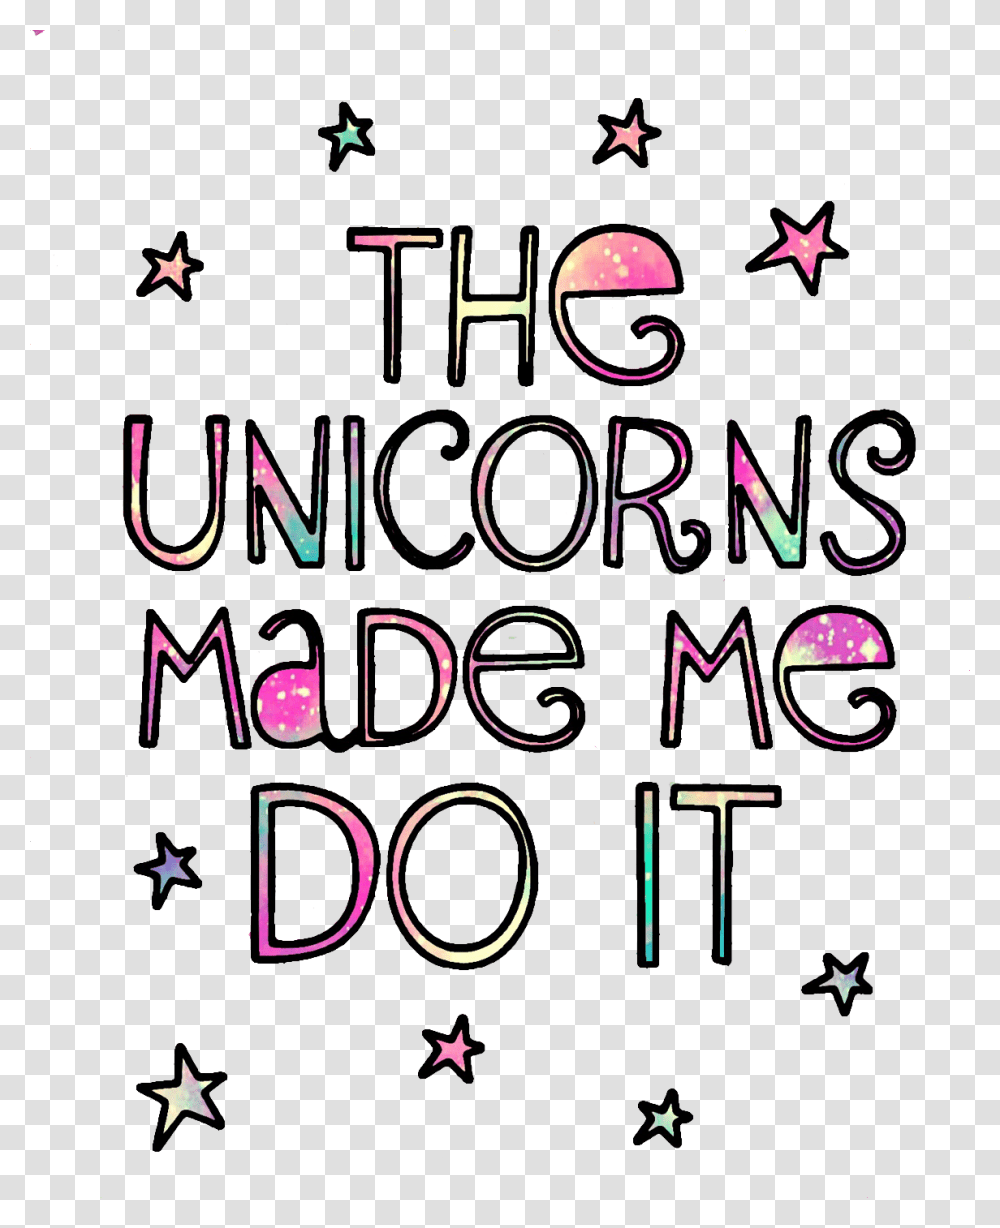 Unicorns Quotes Stars Stickers Colorful Cute Girly Glittery Cute Quotations, Alphabet, Paper, Poster Transparent Png